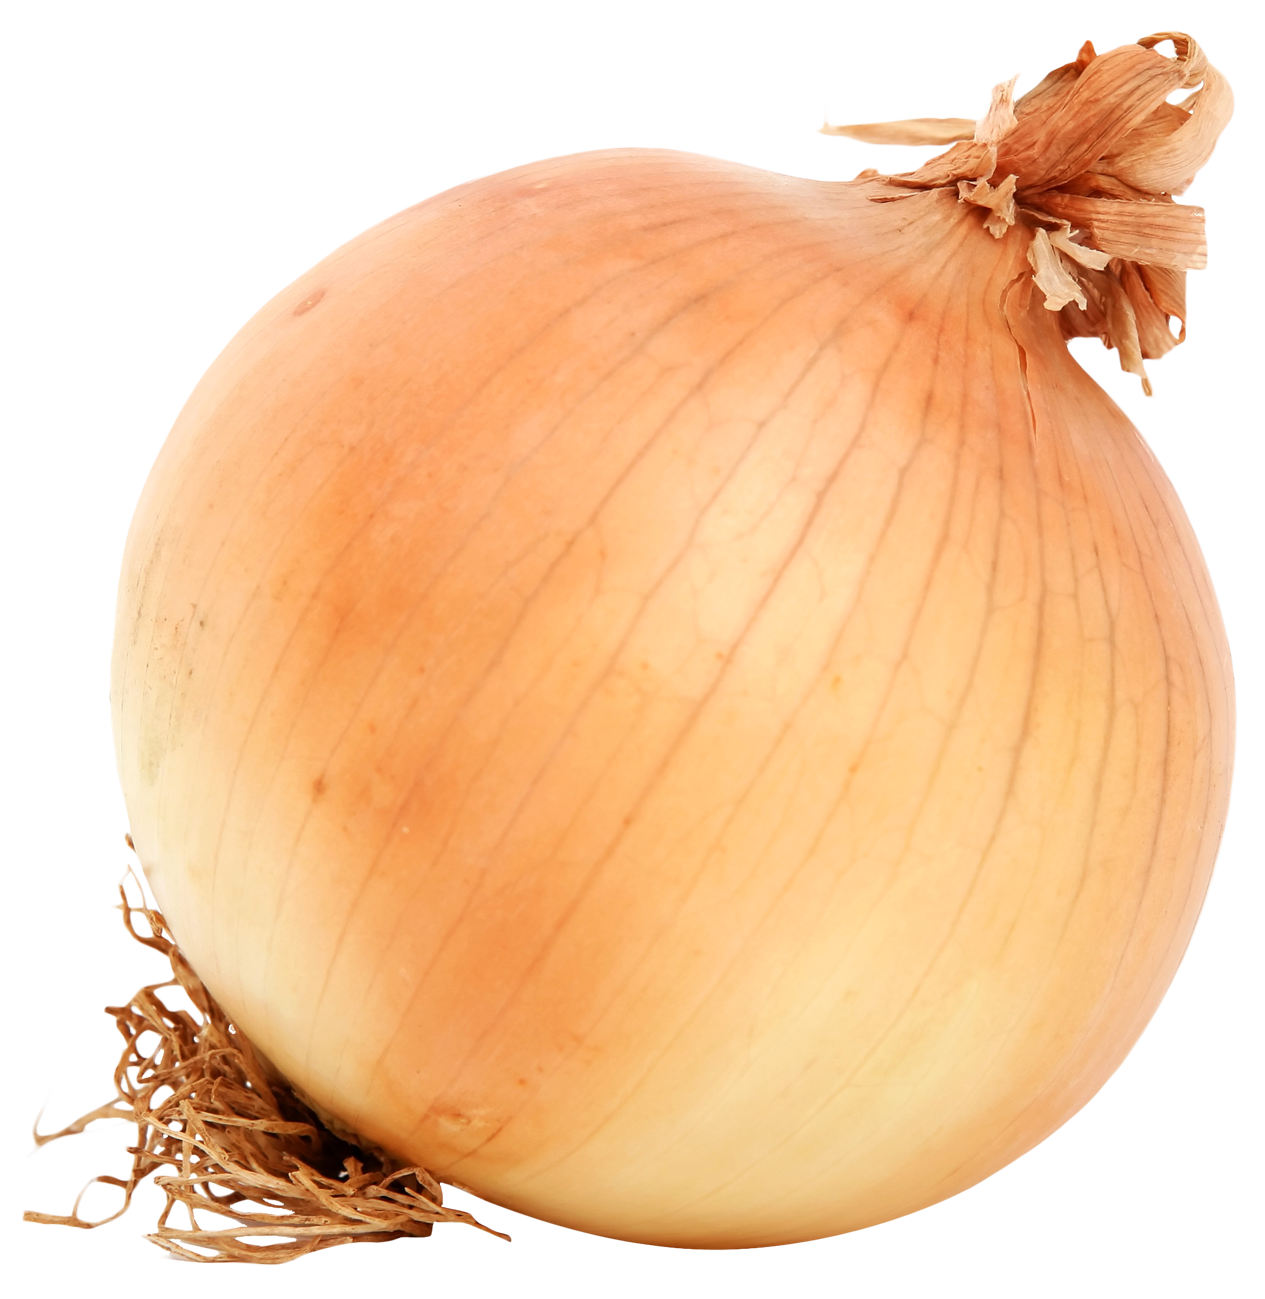 Brown Onion PNG image, Onion PNG - Free PNG